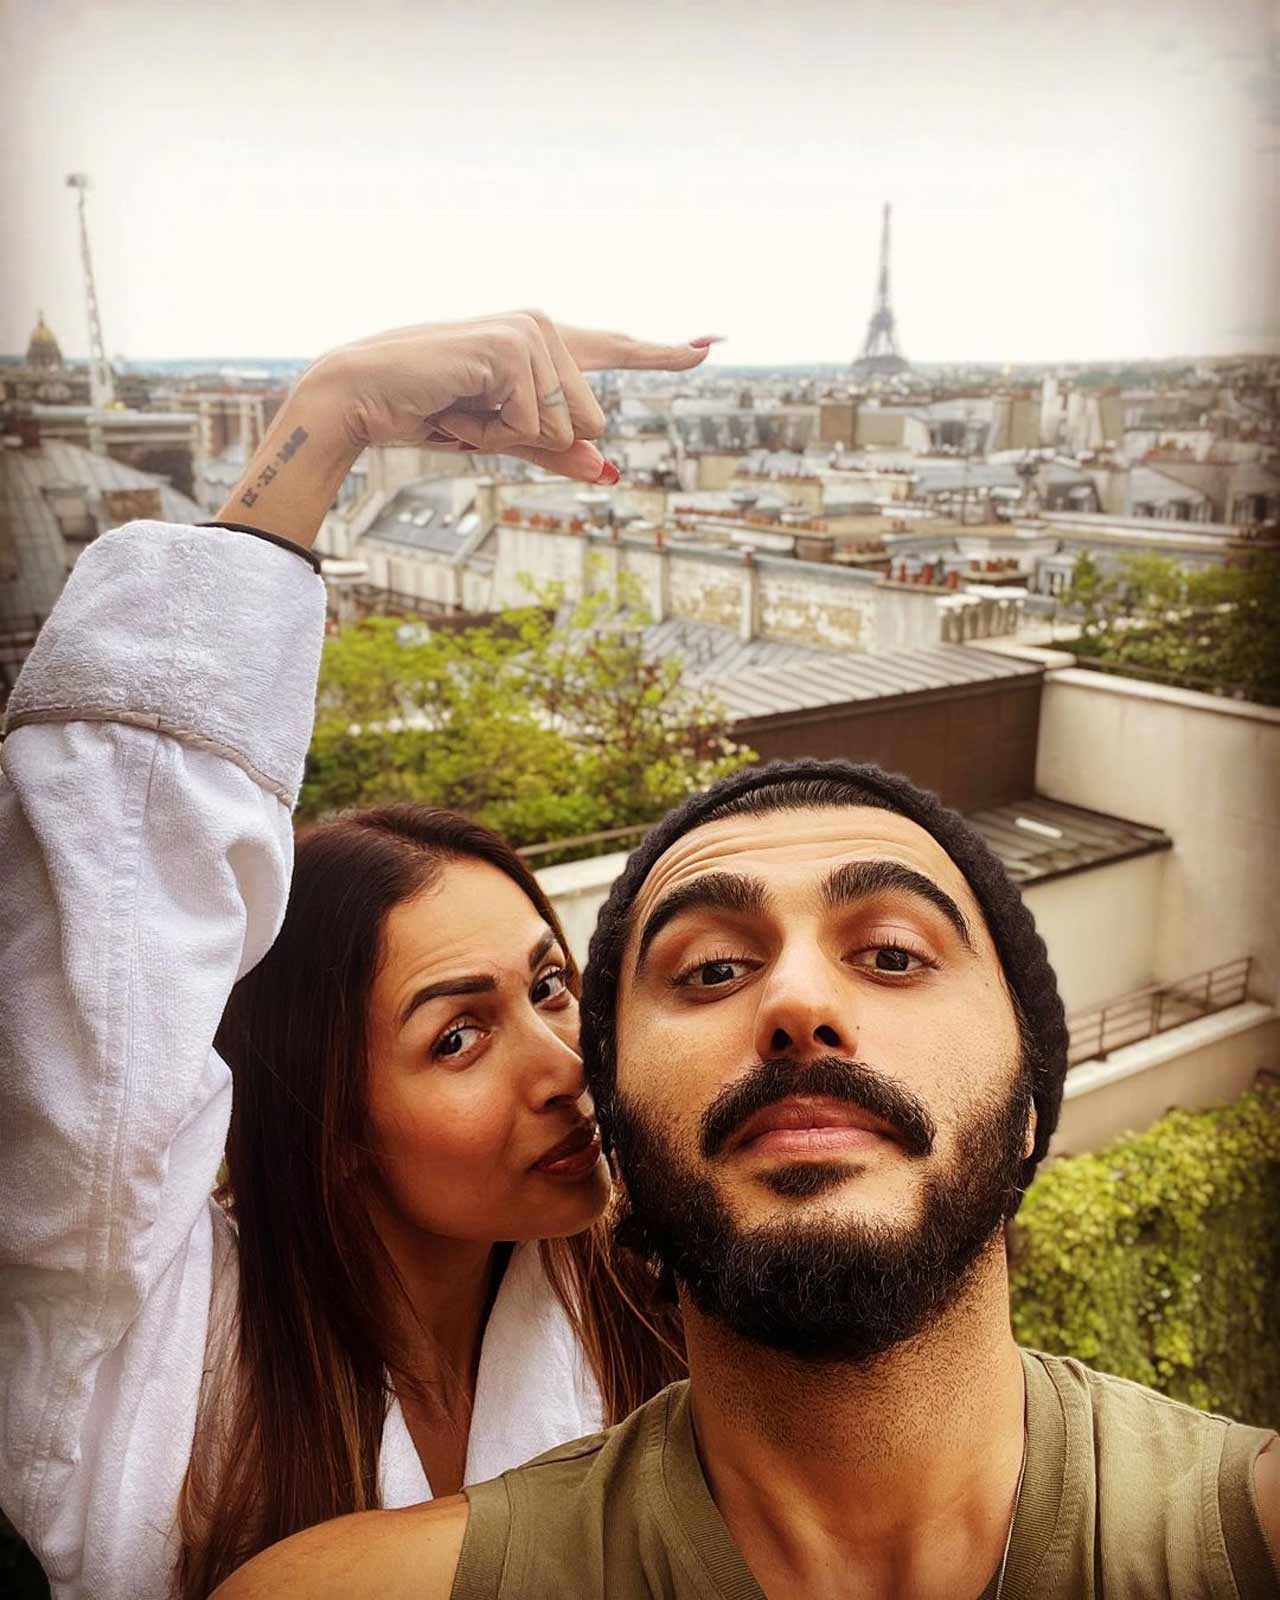 Malaika and Arjun landed in the beautiful destination of Paris to celebrate Arjun's 37th birthday. Arjun and Malaika have been dating each other for a long time and are often seen sharing heartwarming posts on their respective social media handles